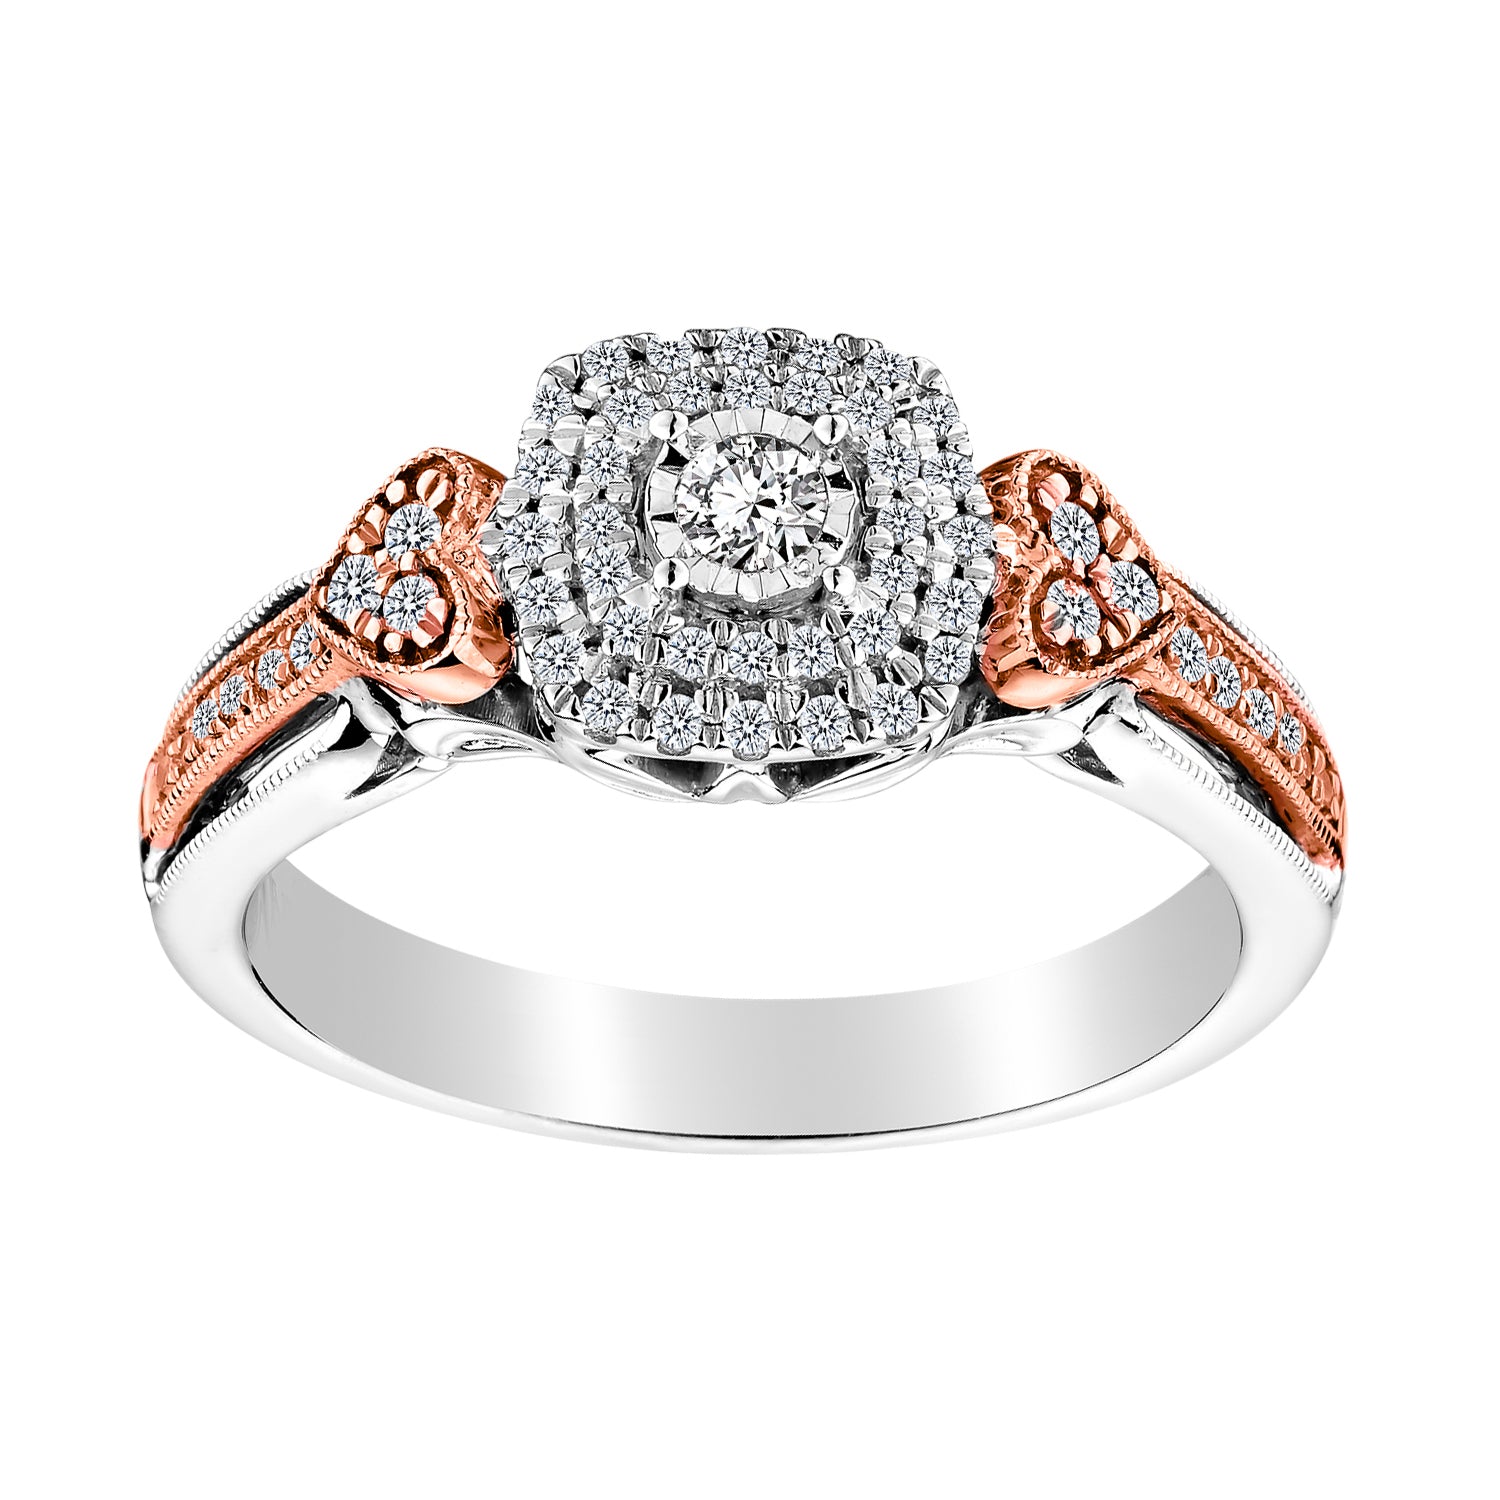 .33 Carat Diamond Pave Ring, 10kt White And Rose Gold (Two Tone) - Griffin Jewellery Designs